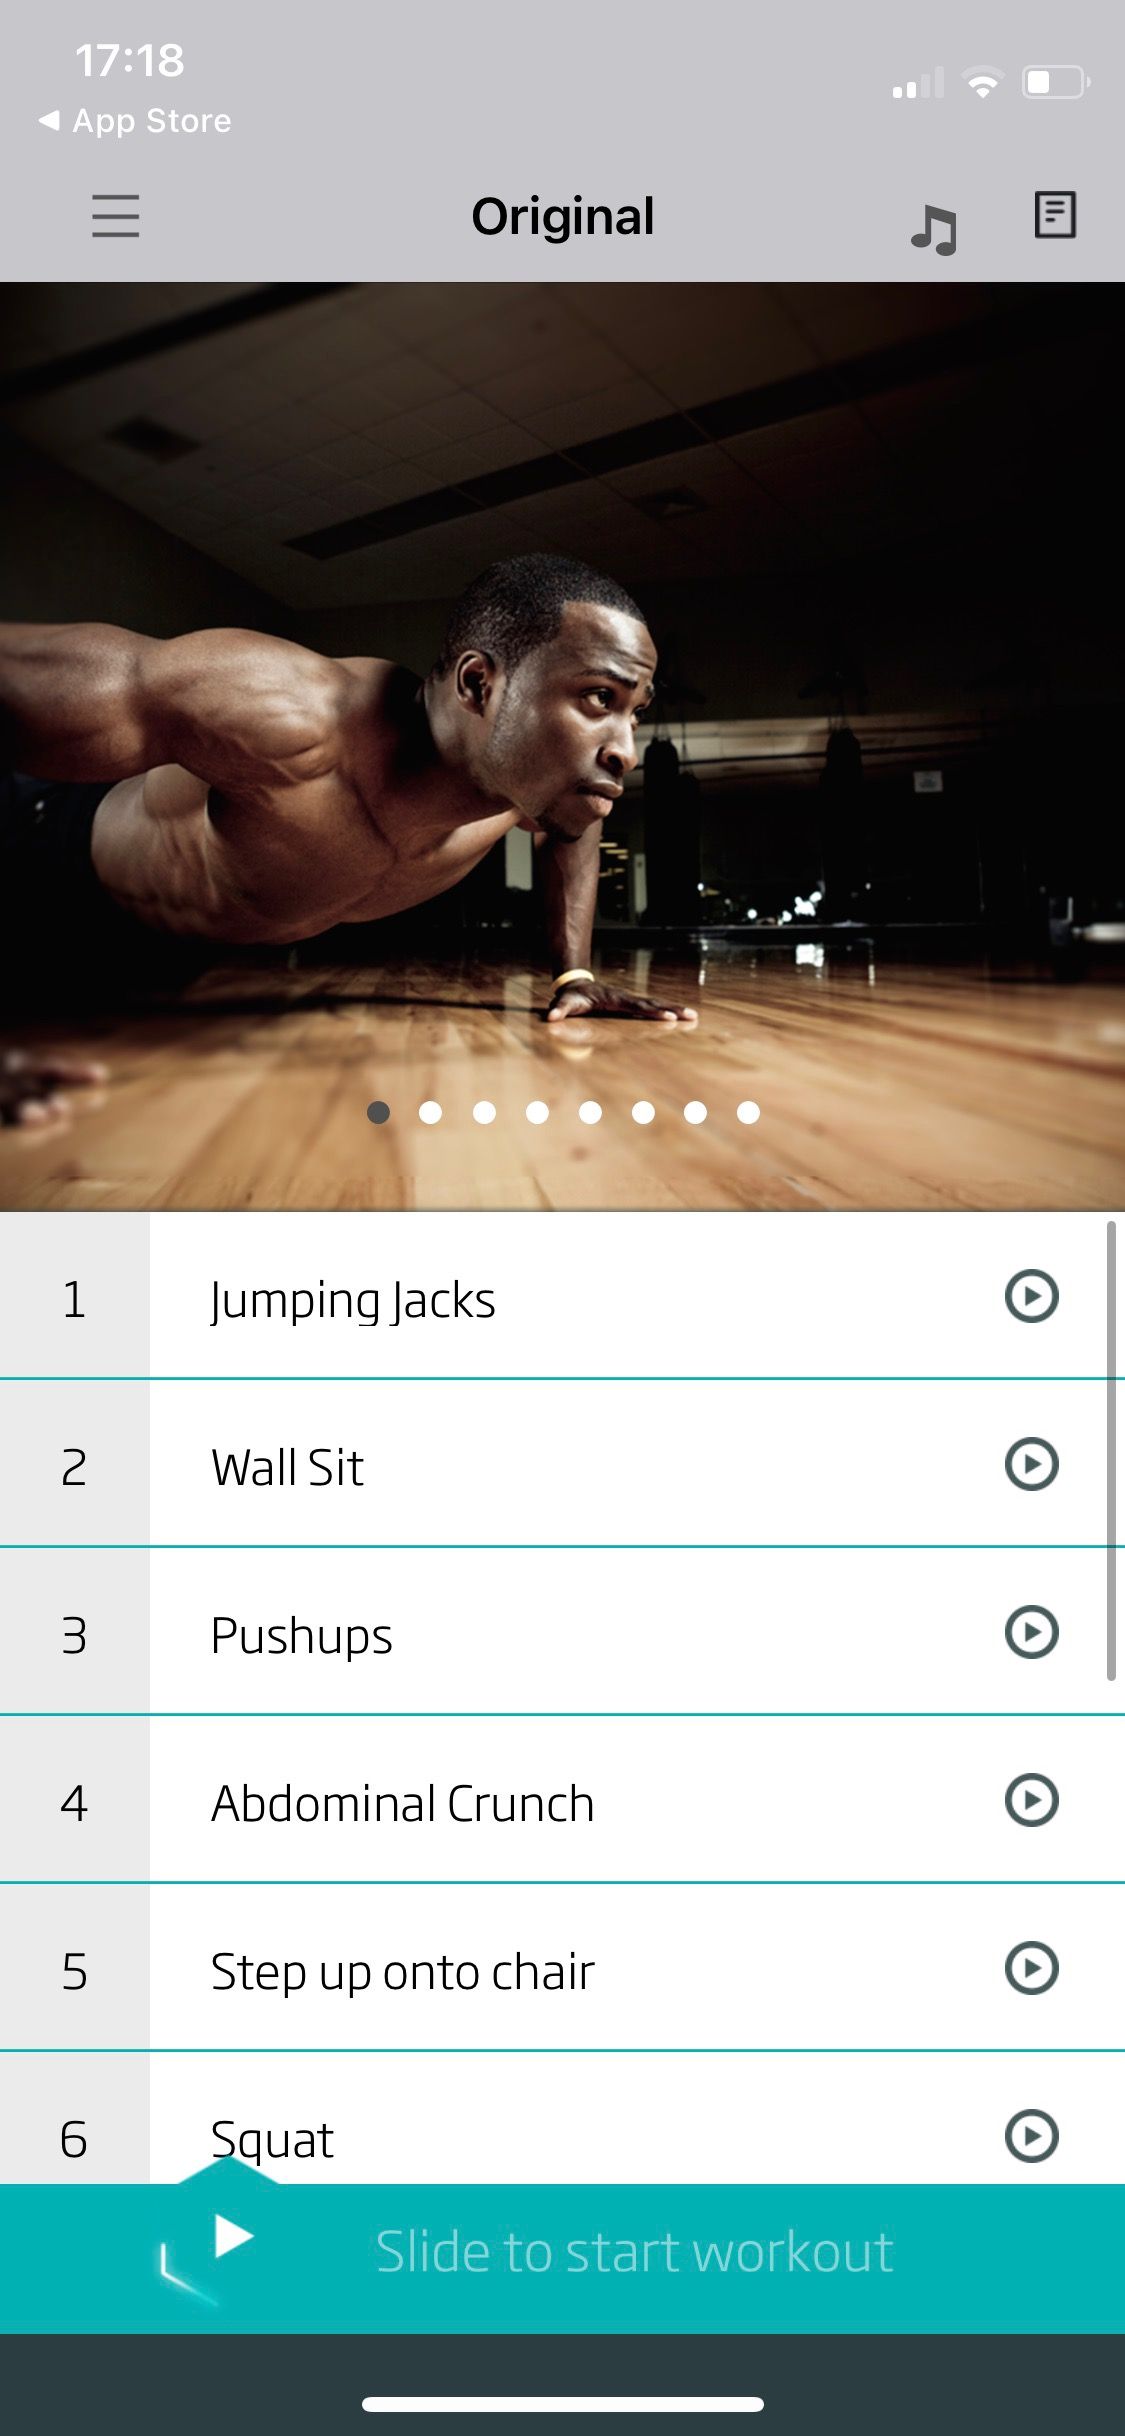 7 Minute Workout: Easy Fitness on the App Store